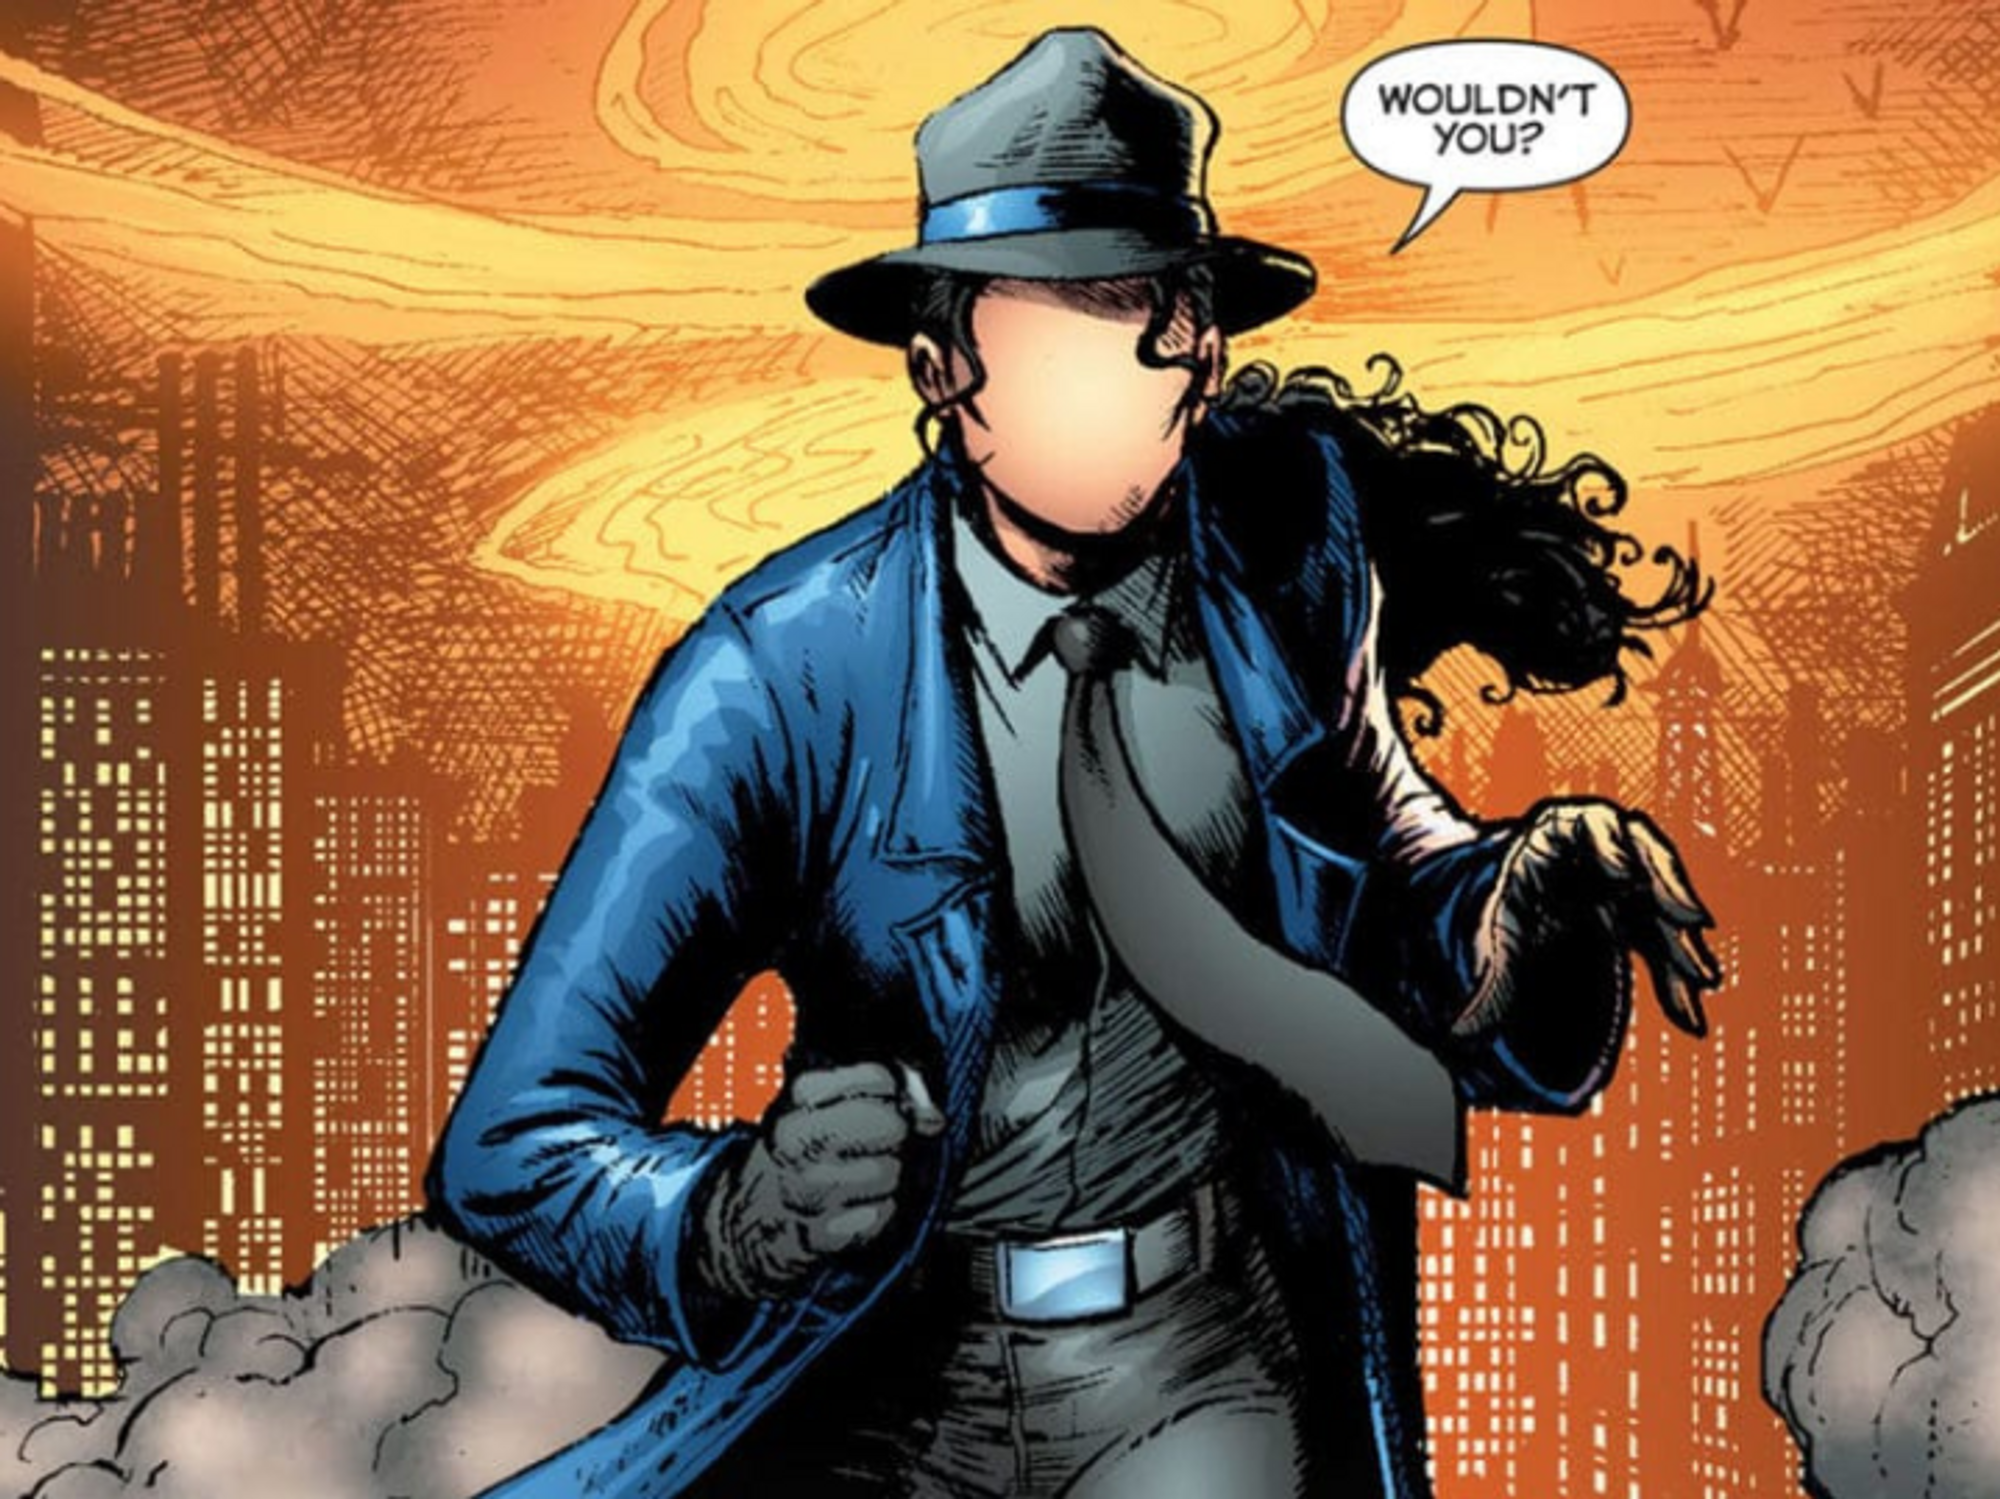 Artwork for the character Renee Montoya aka The Question